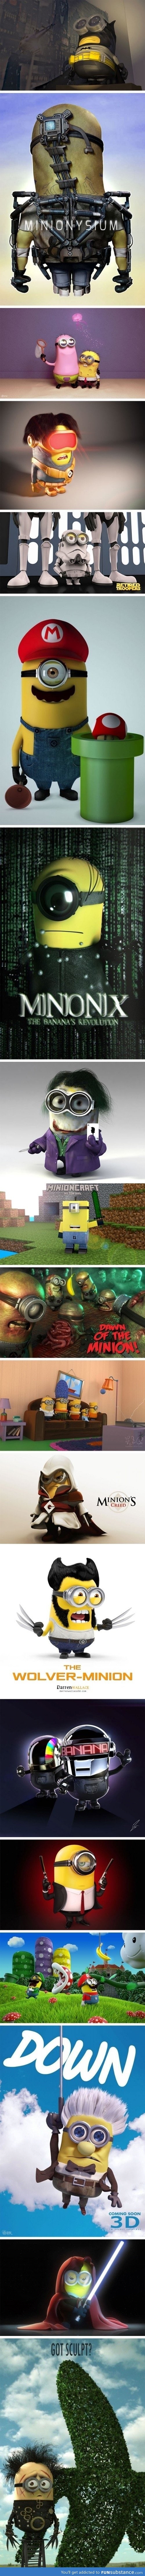 All the different minions